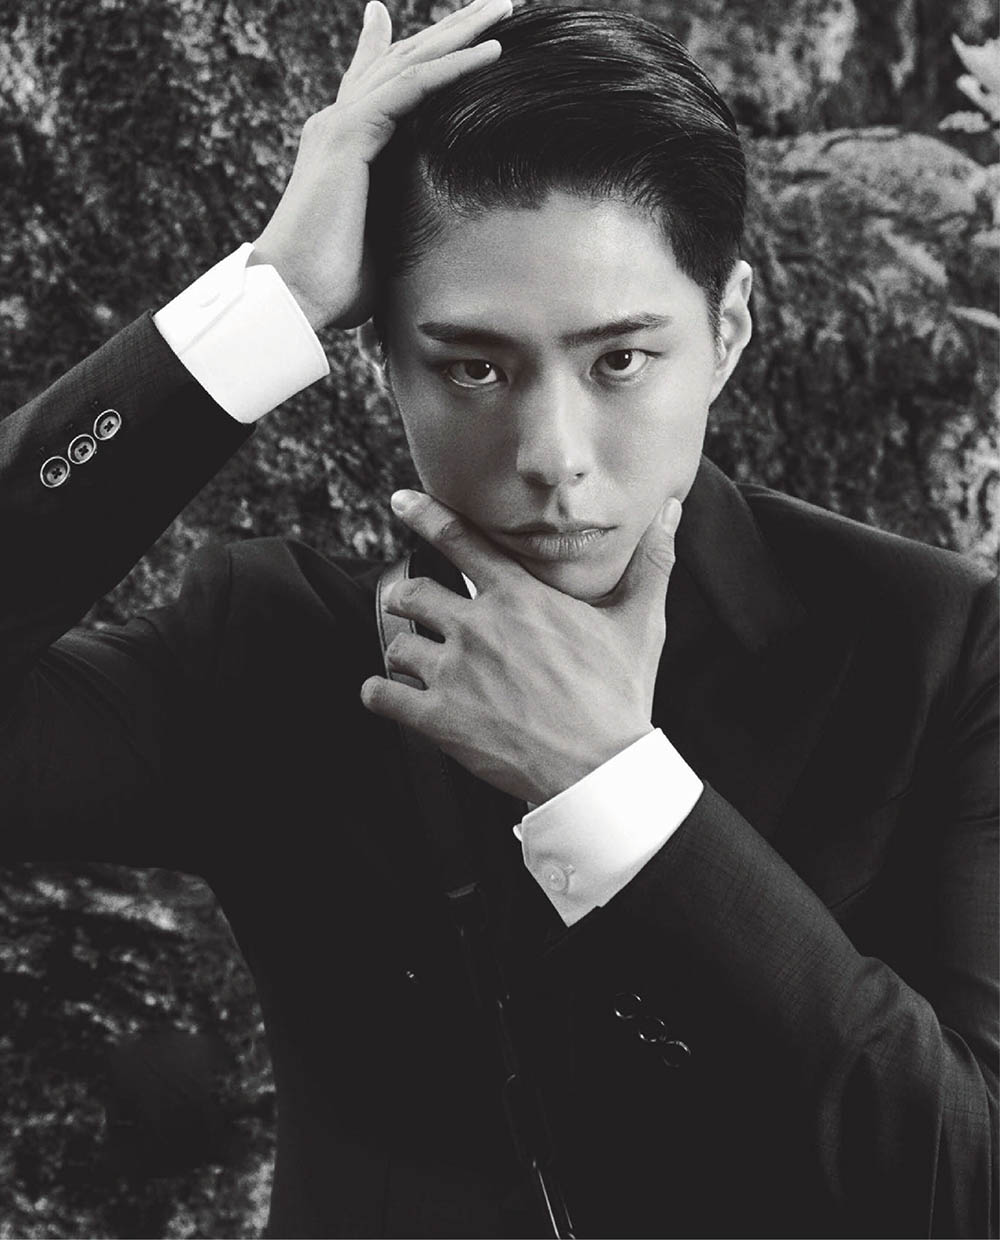 Vogue Taiwan' with cover model Park Bo Gum sells out on the day of release